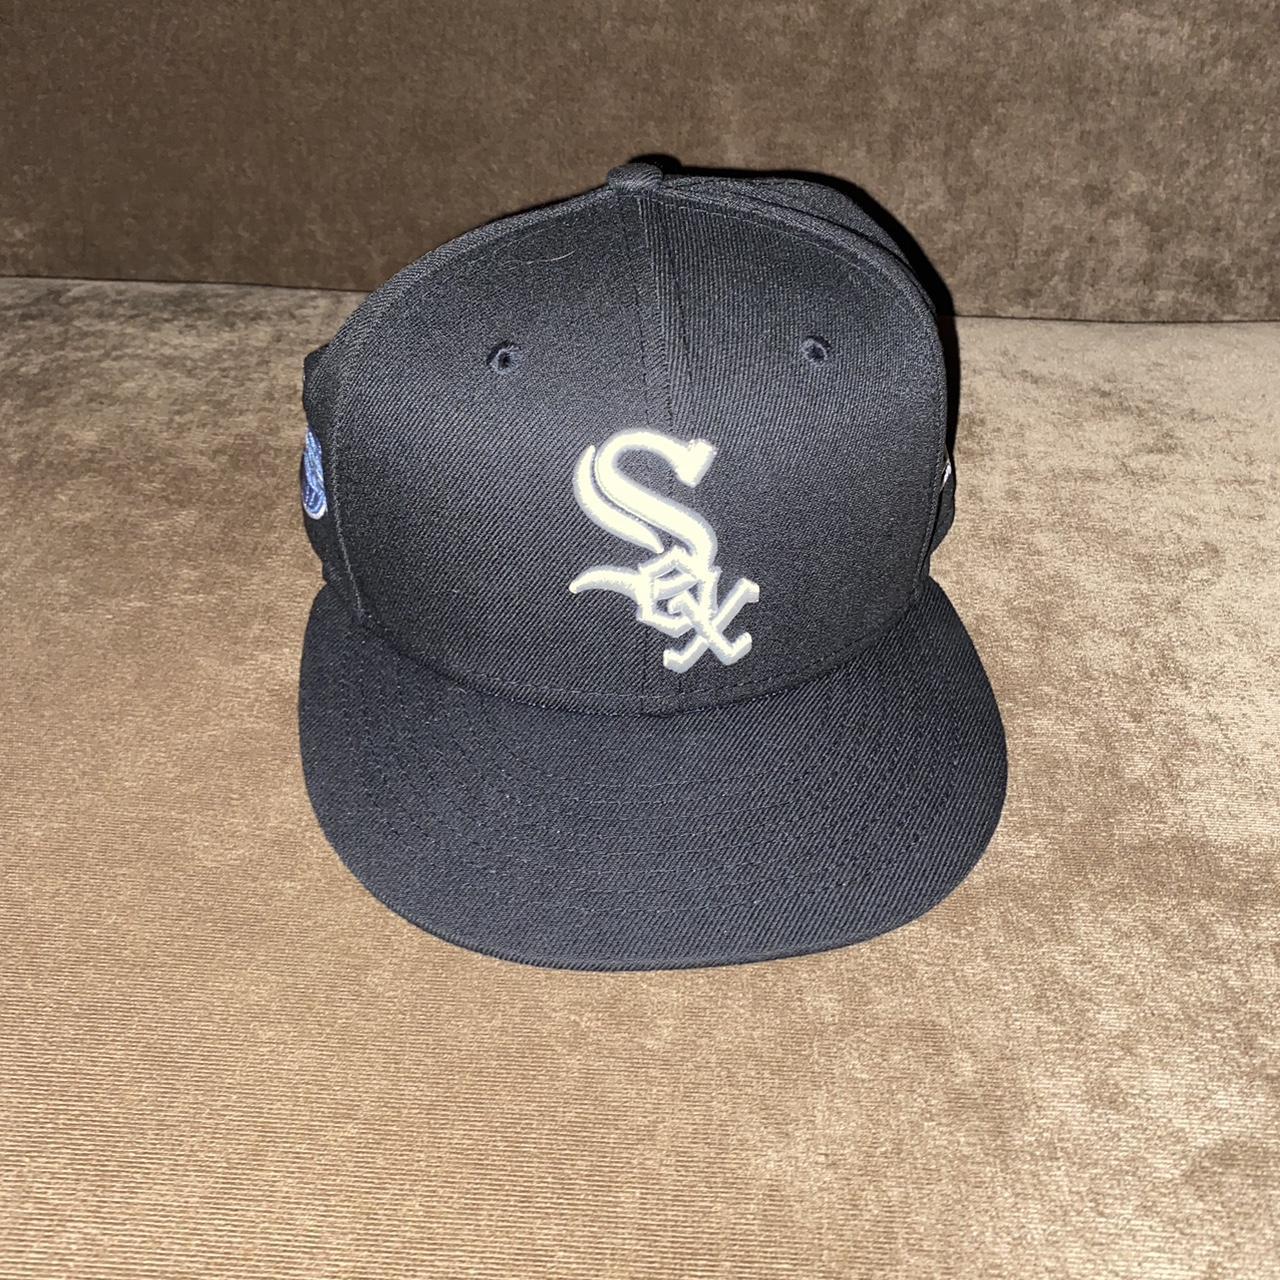 7 3/8 White Sox hat 2005 World Series patch barely - Depop